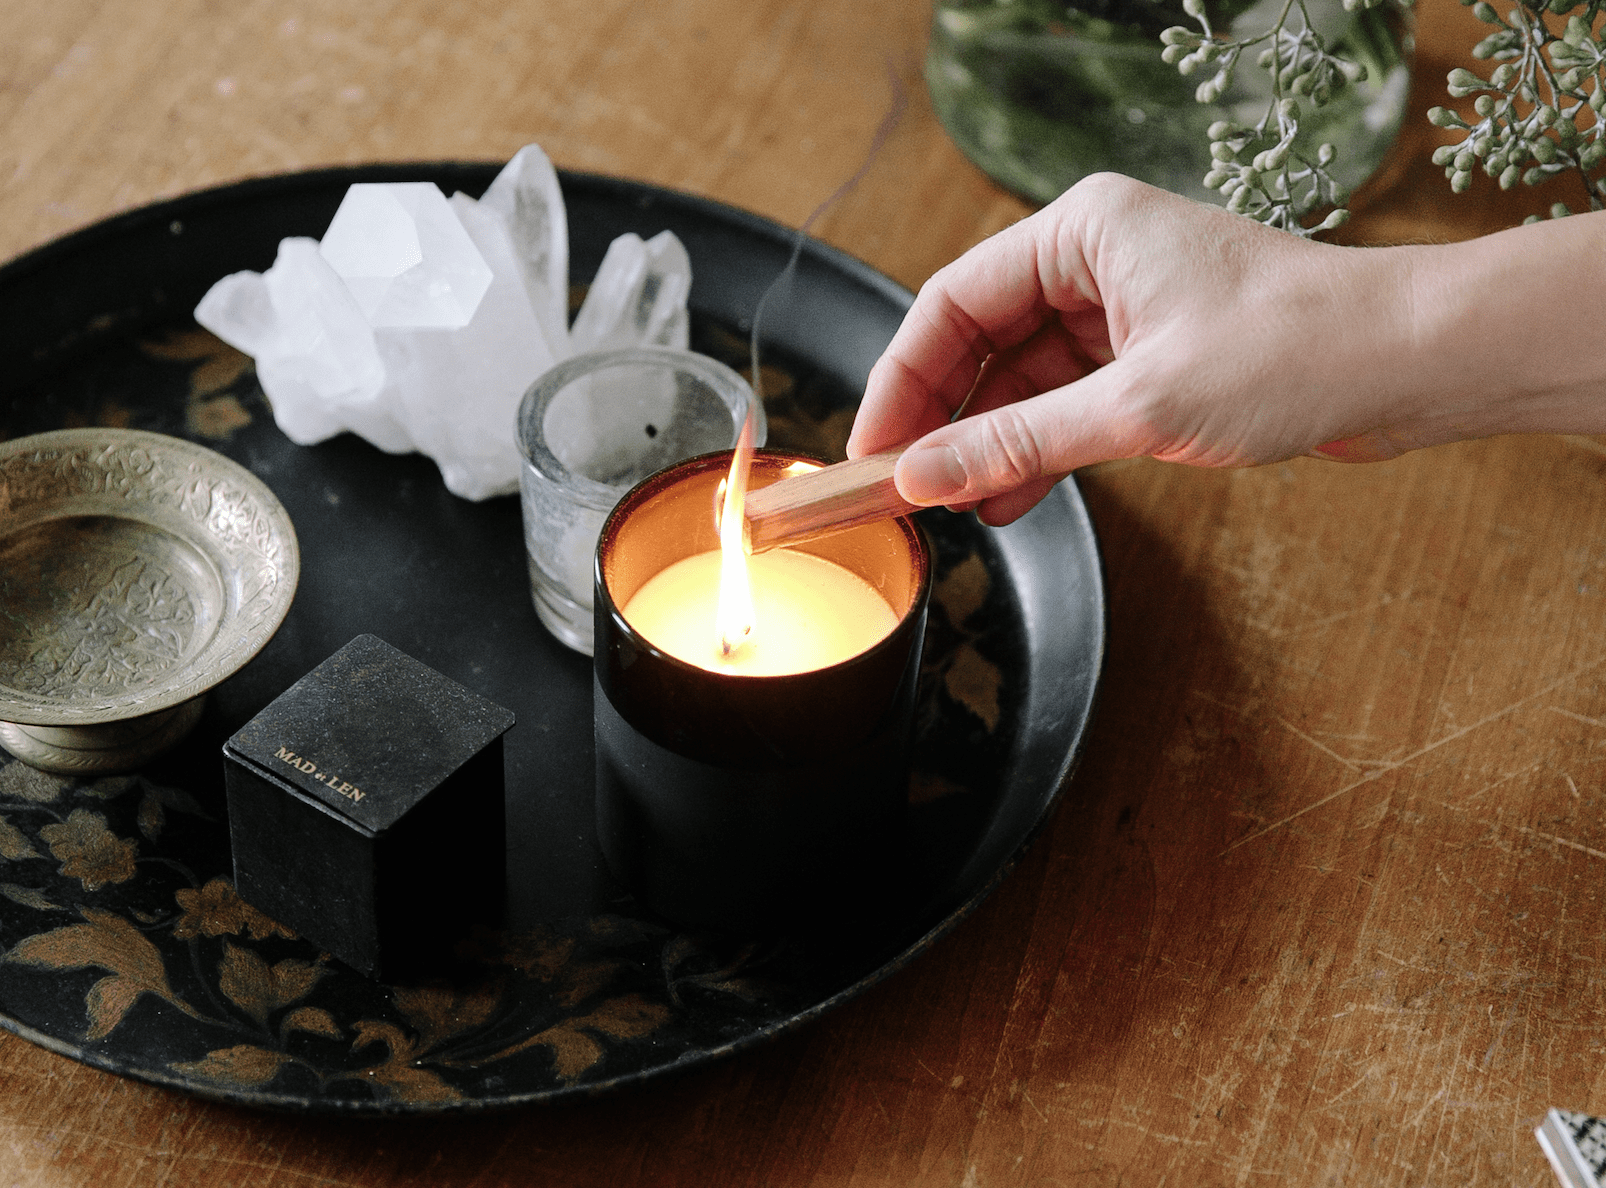 hand lighting incense, lit candle, crystal and brass bowl on black decorative tray resting on wooden table